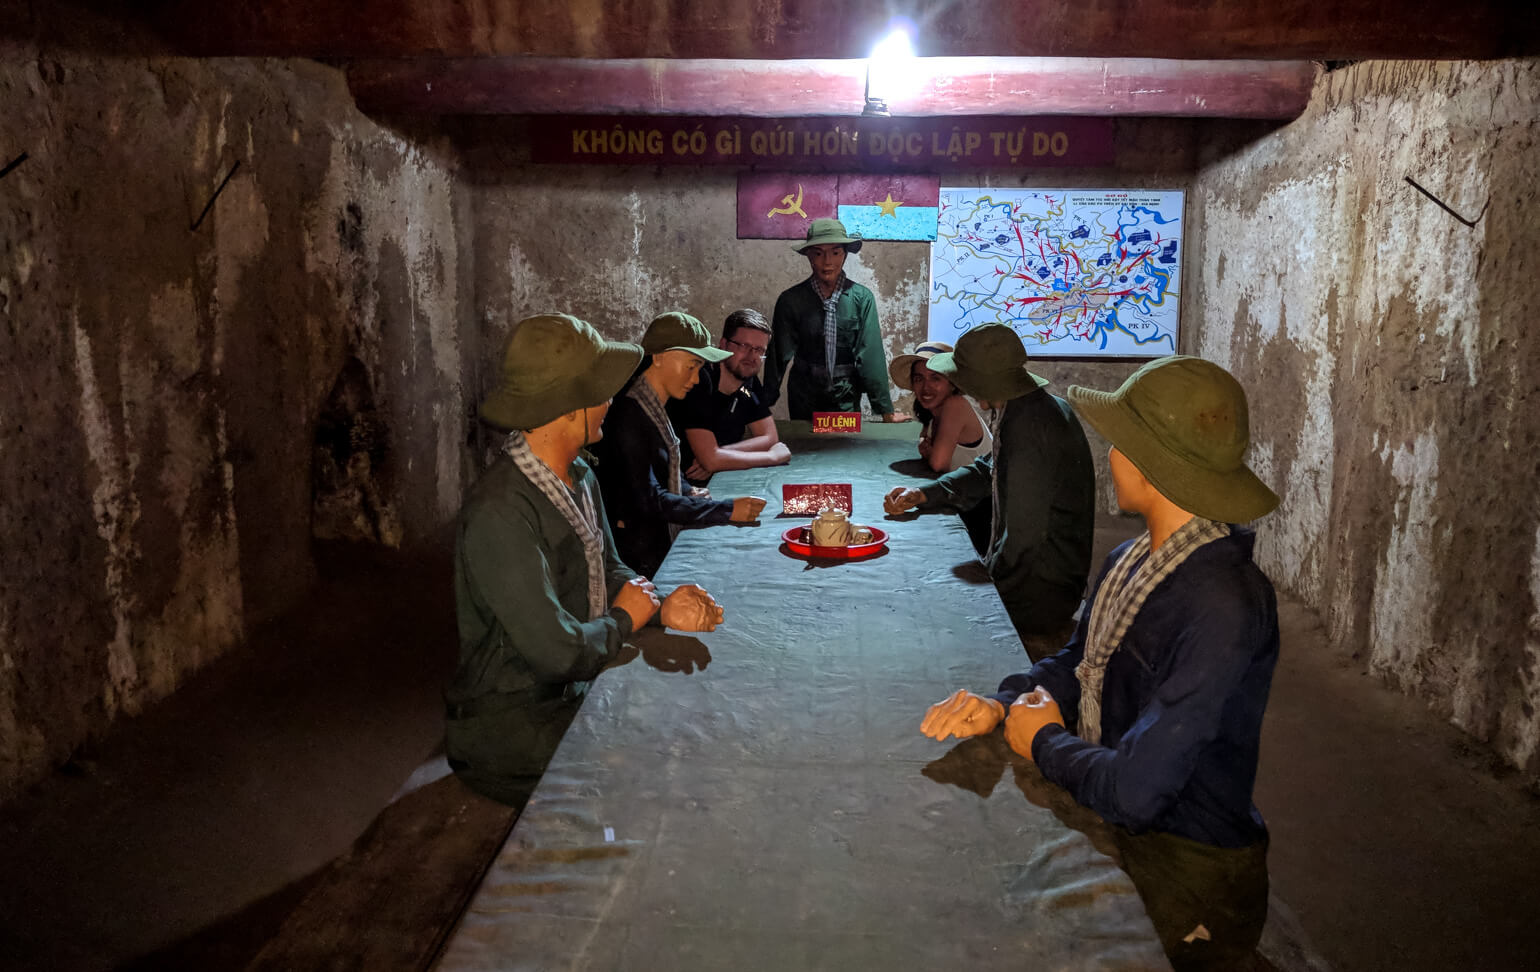 Cu Chi tunnel meeting room